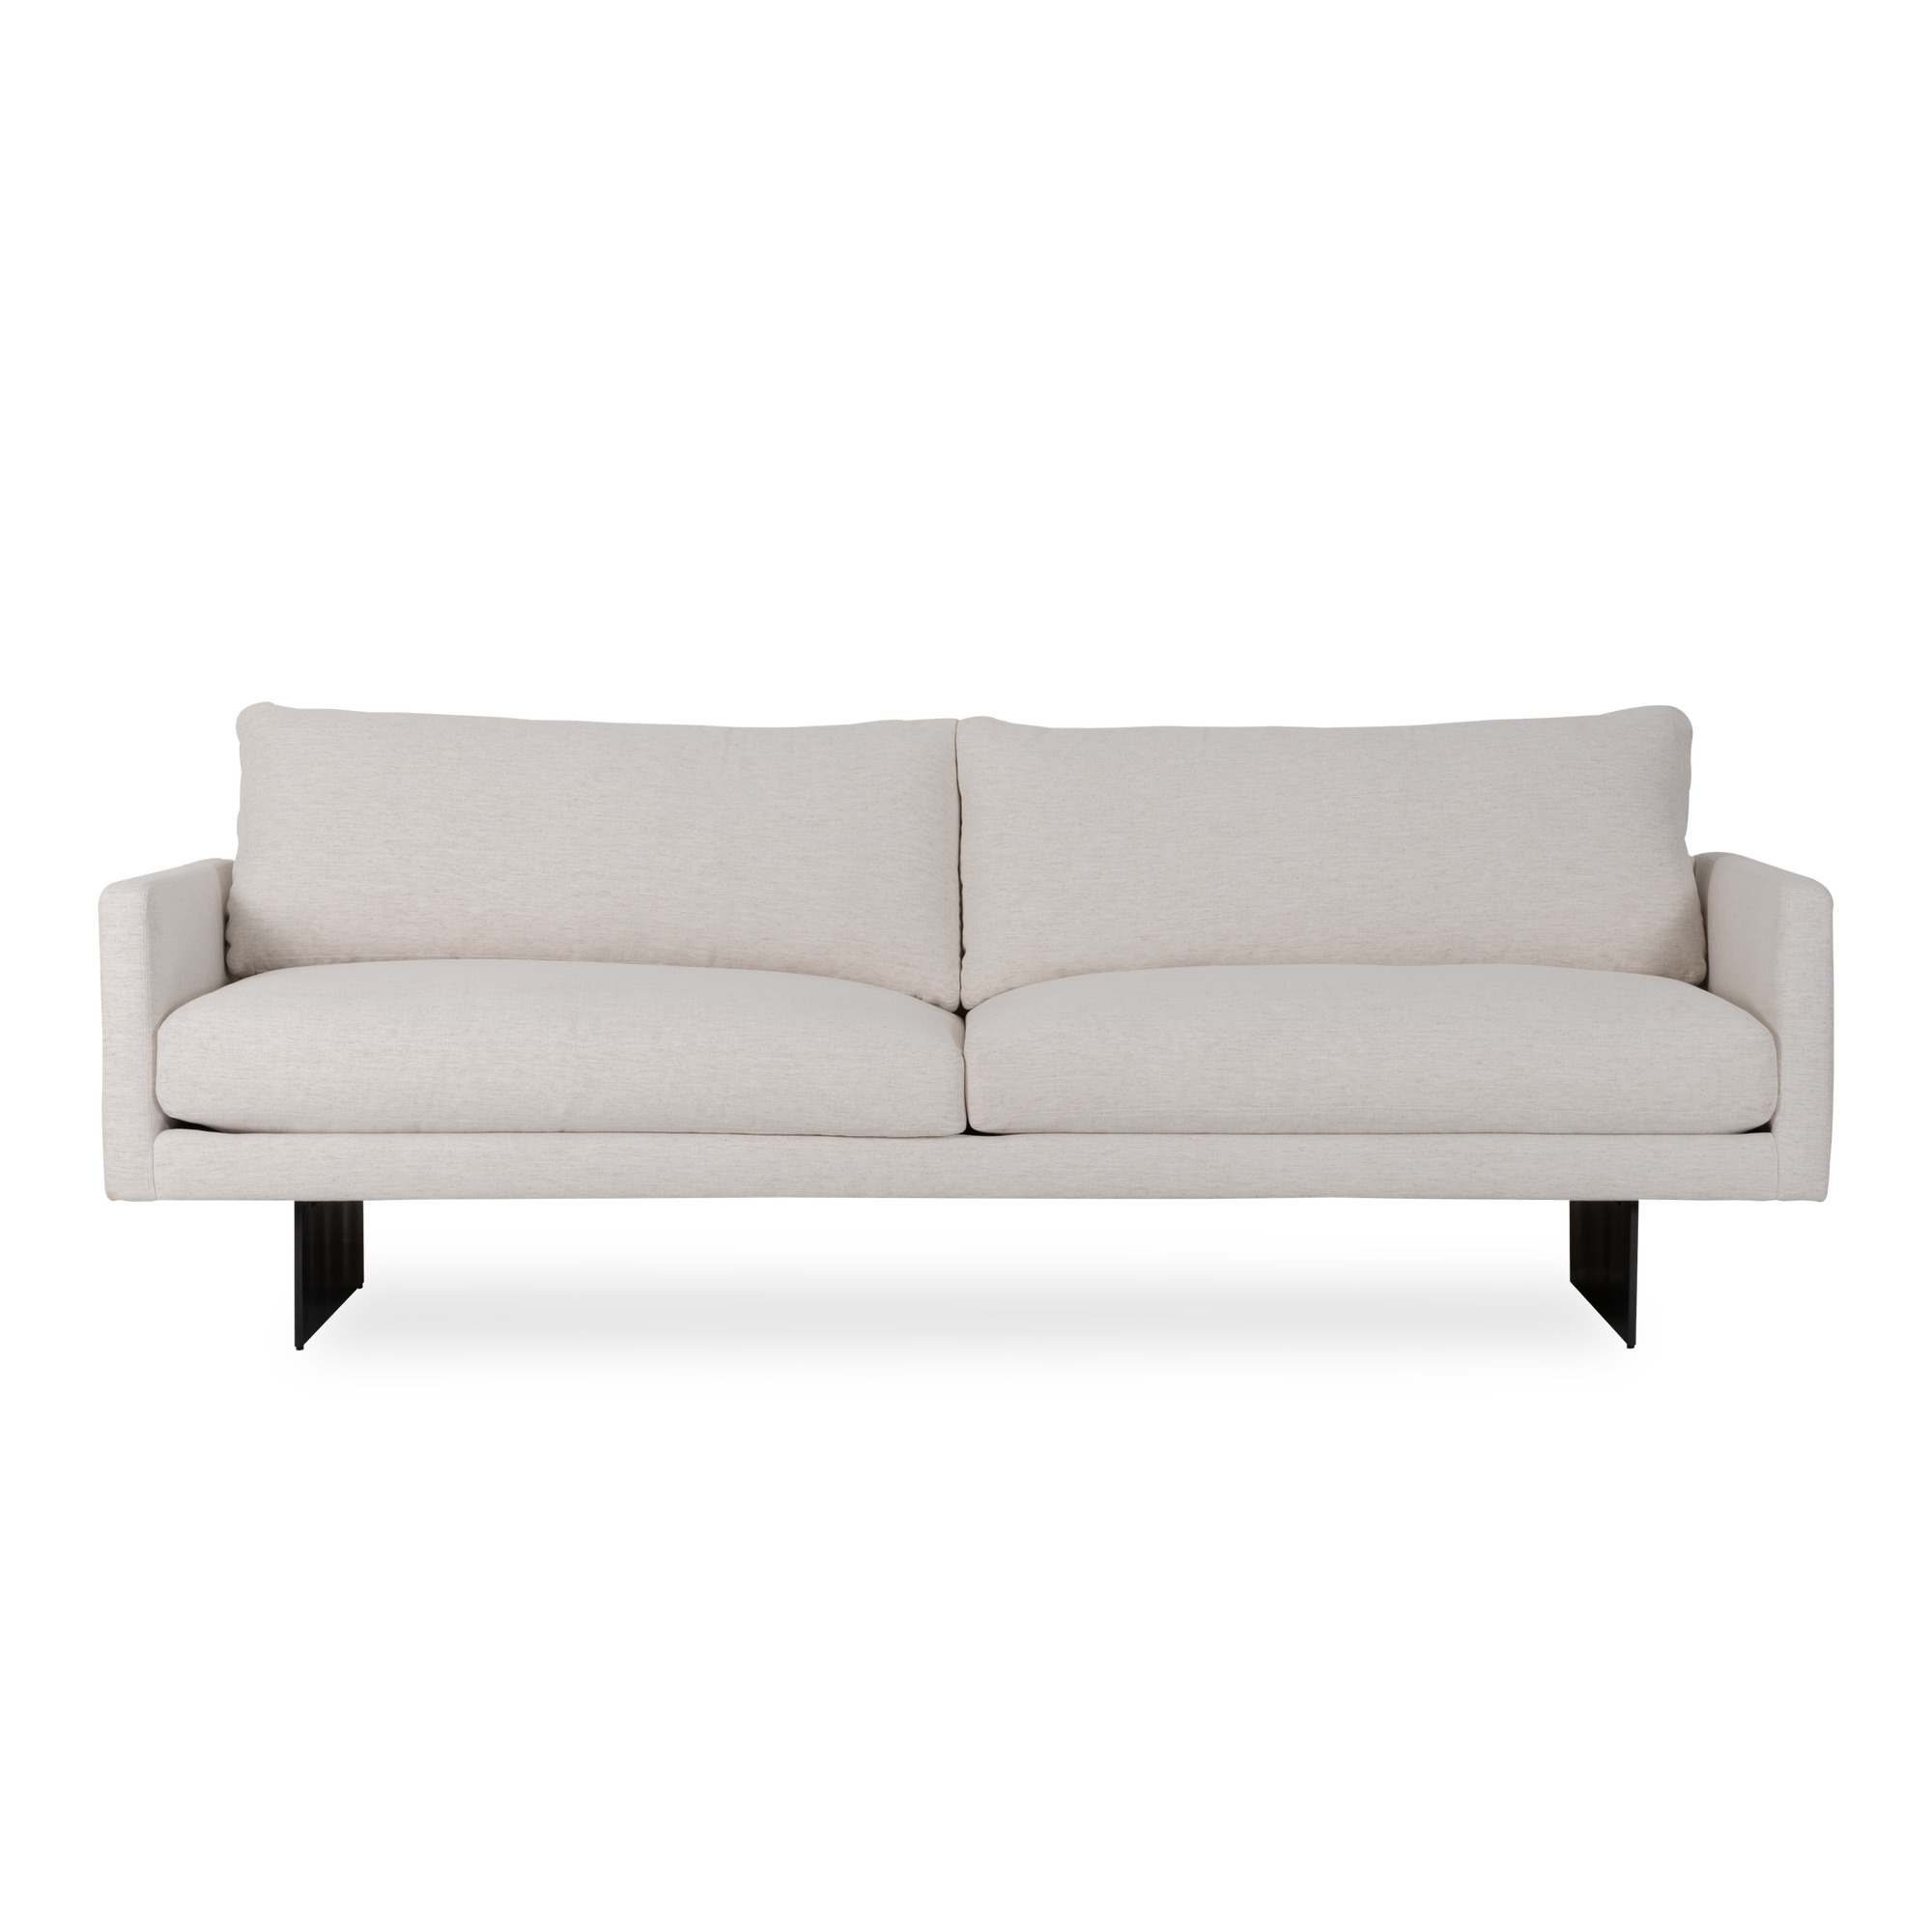 Designed by Ransom Culler, the edgy Blade Sofa is defined by slender support legs that give this piece the illusion of being suspended in thin air.